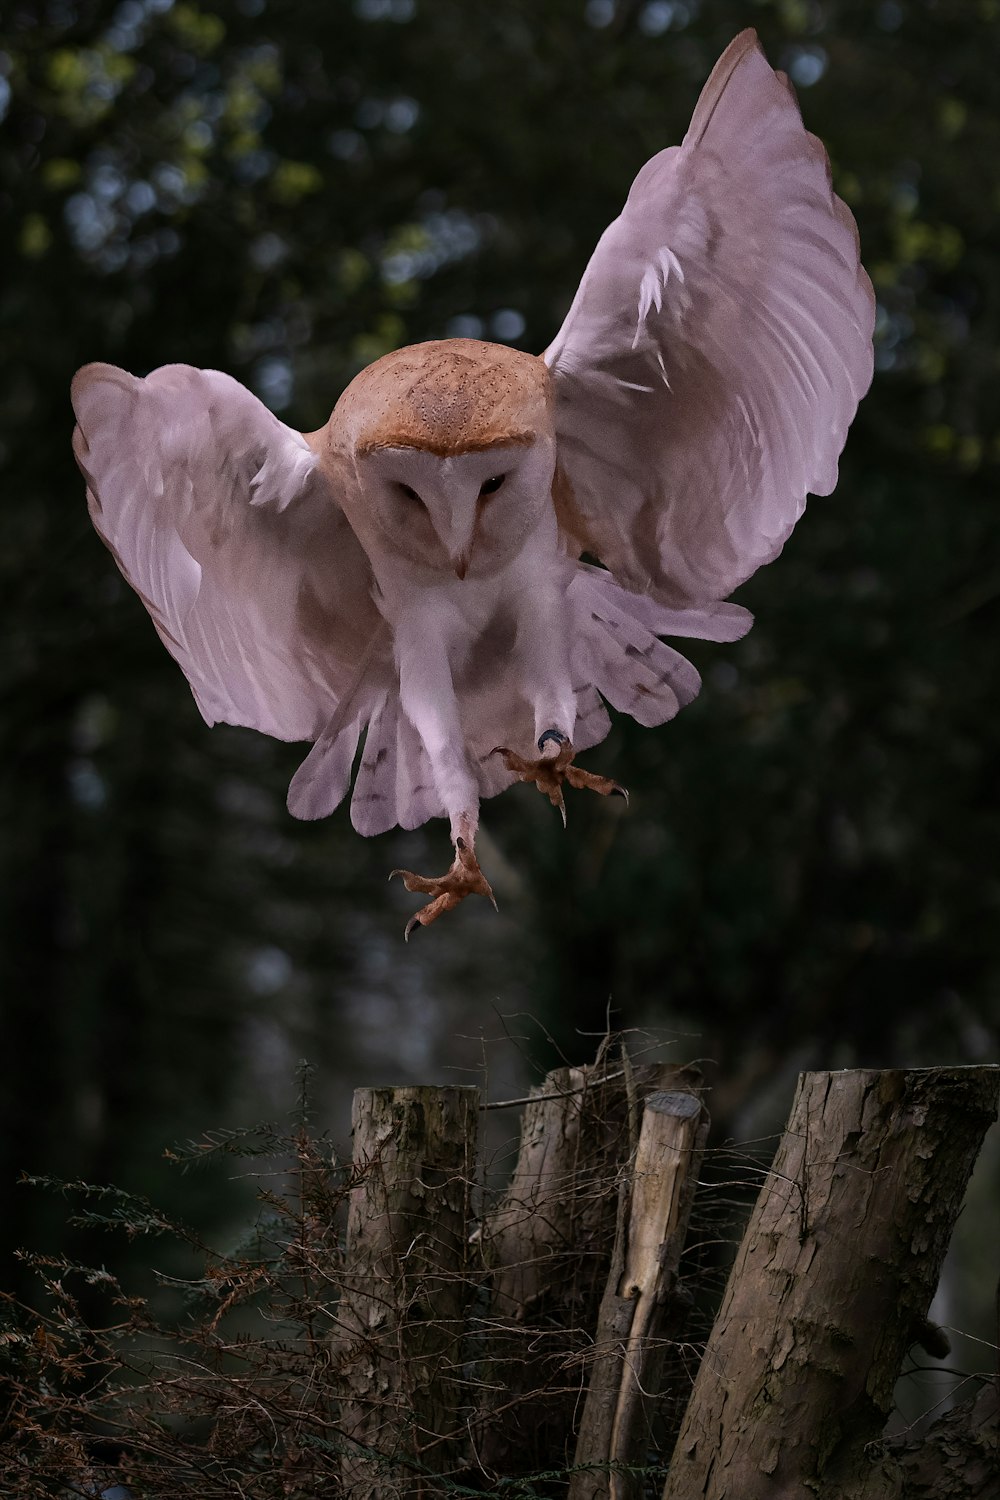 a barn owl spreads its wings while perched on a fence post